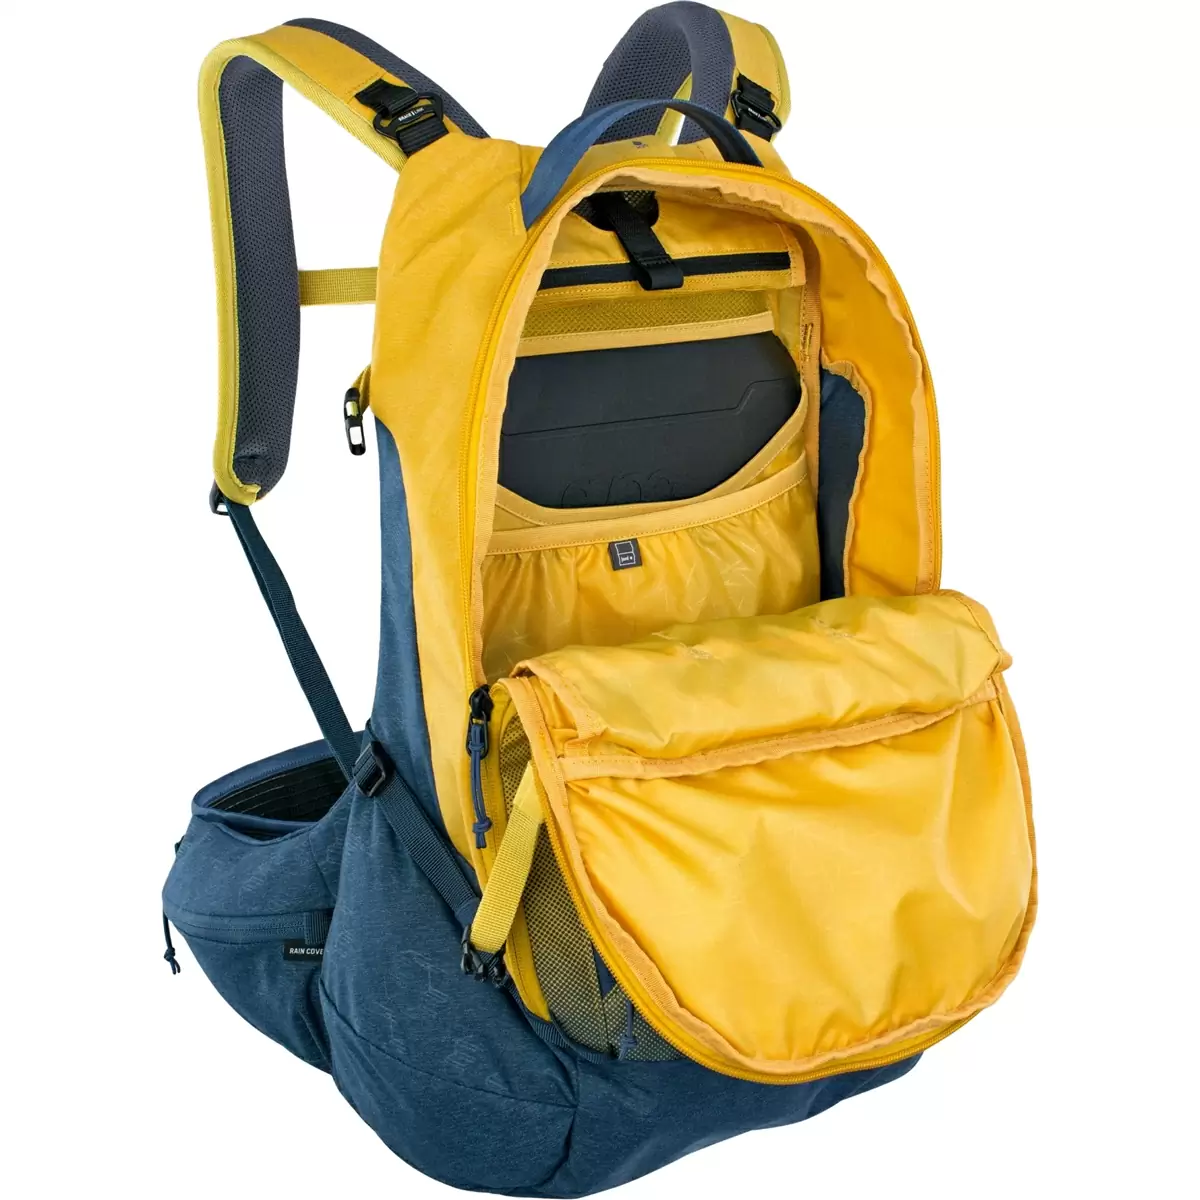 Trail Pro Backpack 26 liters Curry – Denim with Back Protector size S/M #1